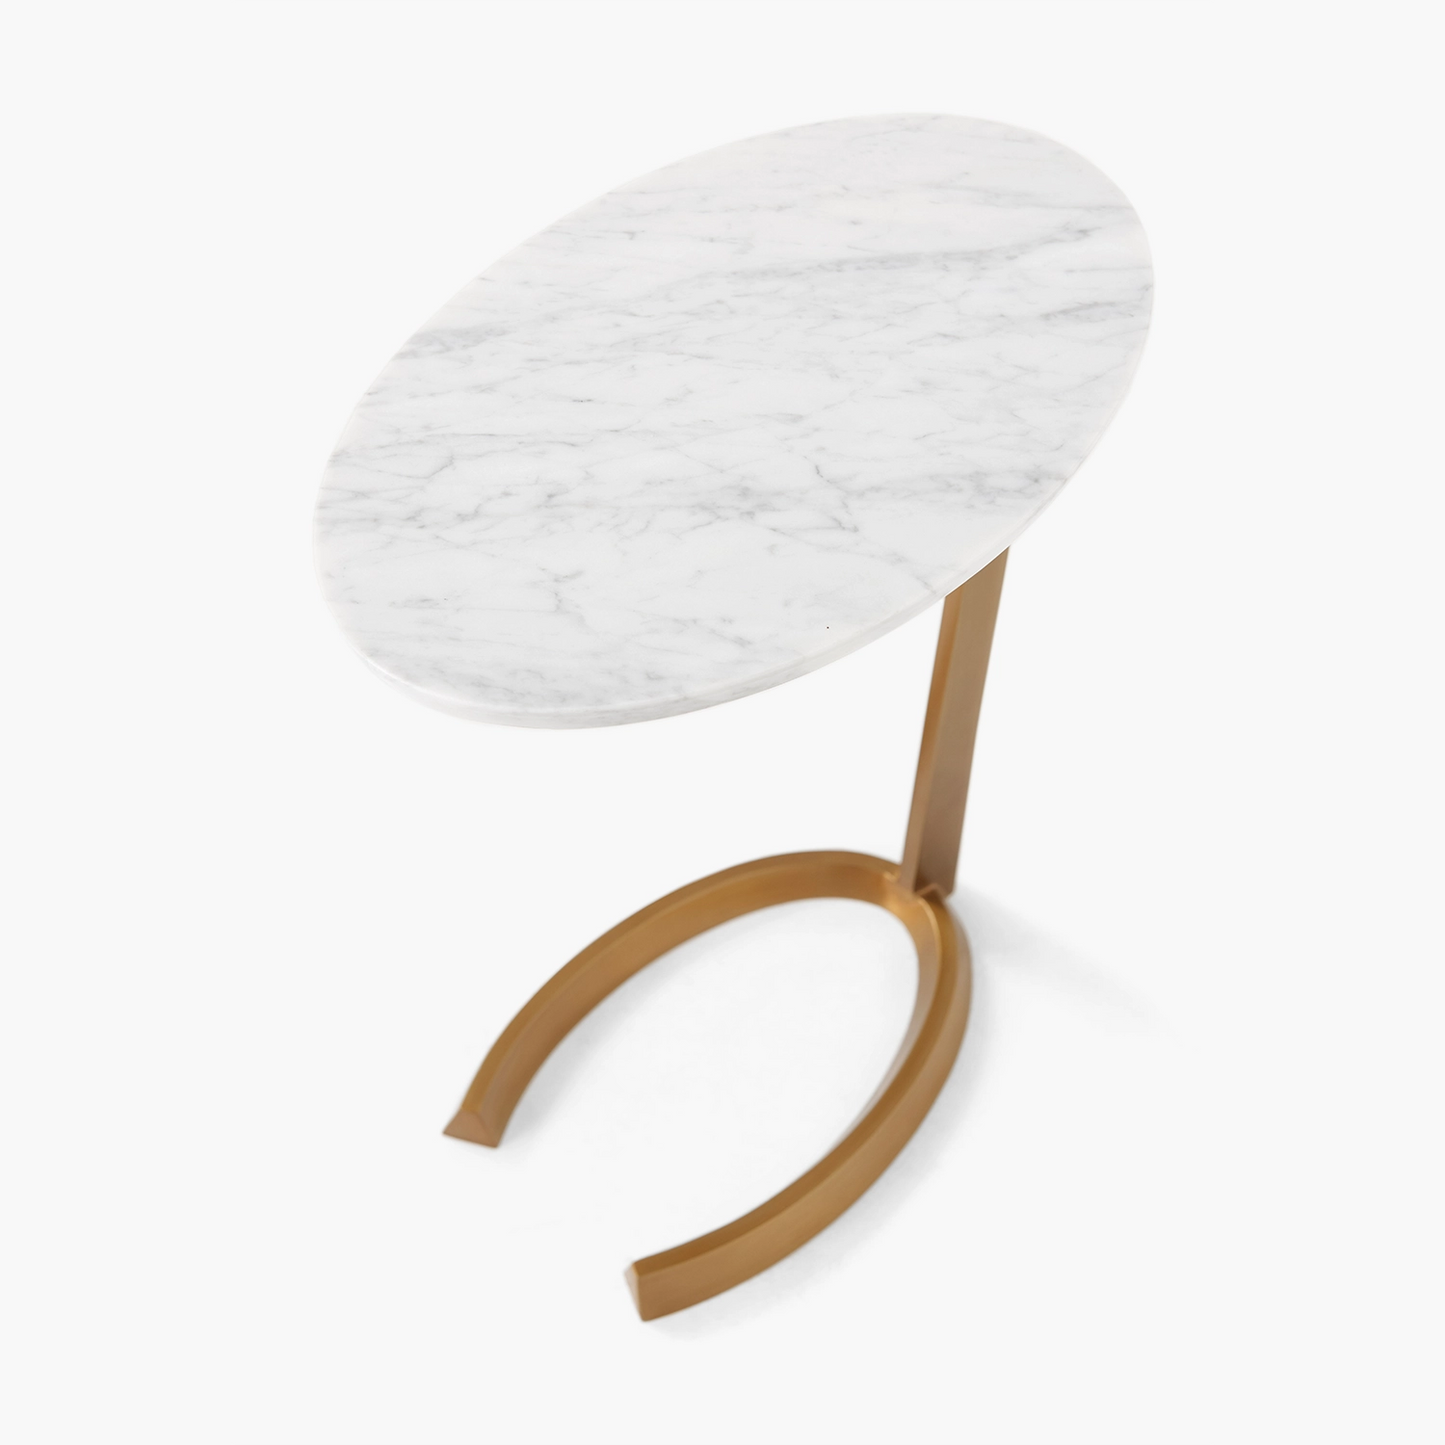 Mineo Accent Table